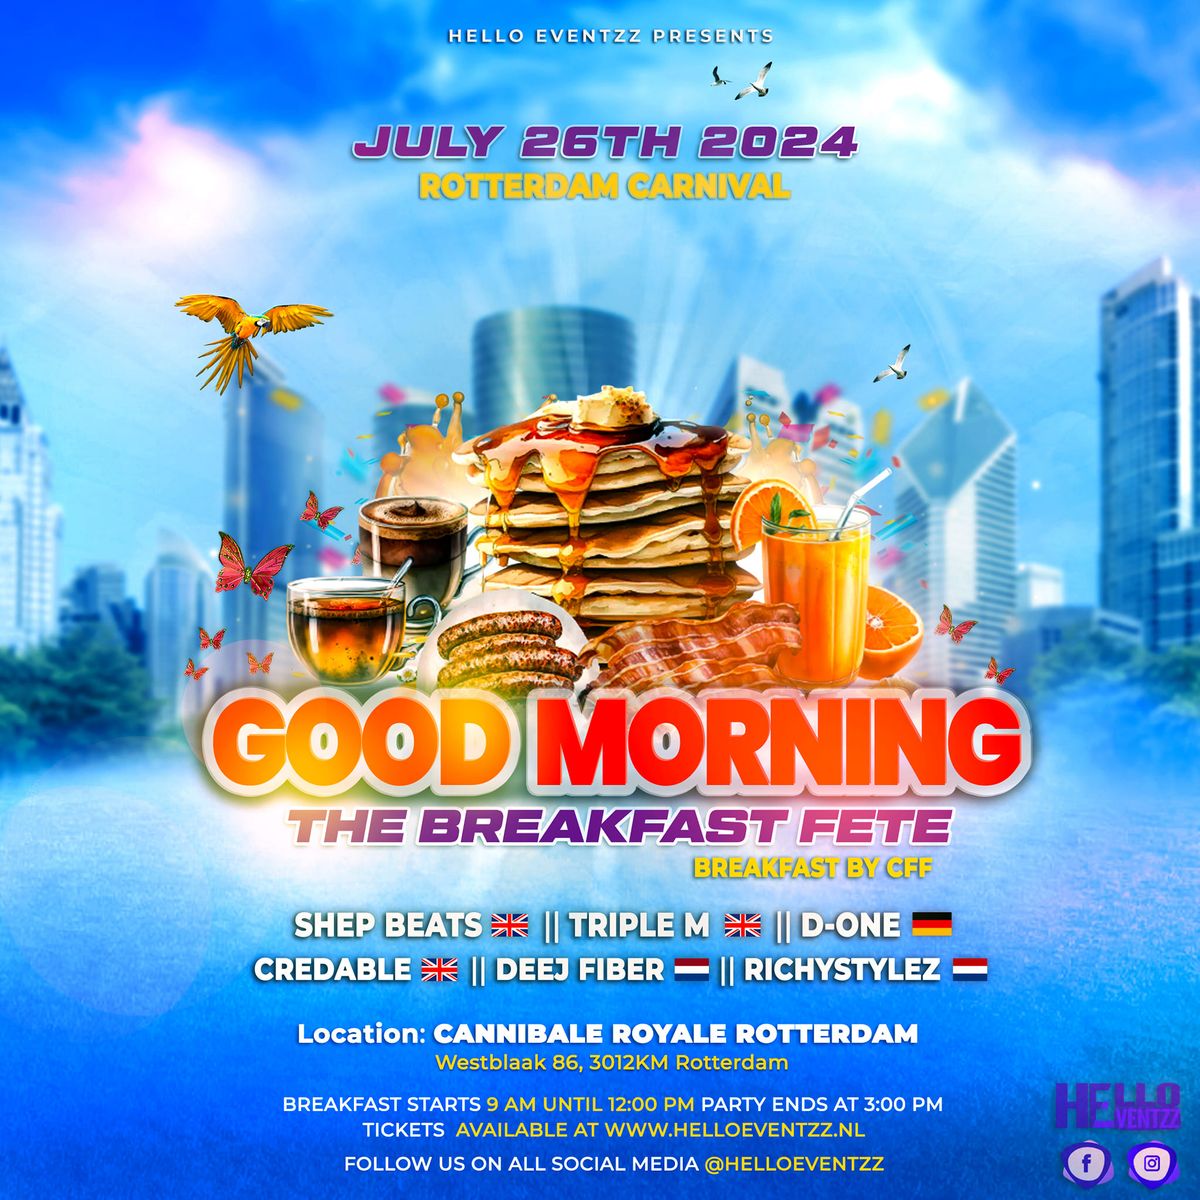 Good Morning - The Breakfast party (Rotterdam Carnival)